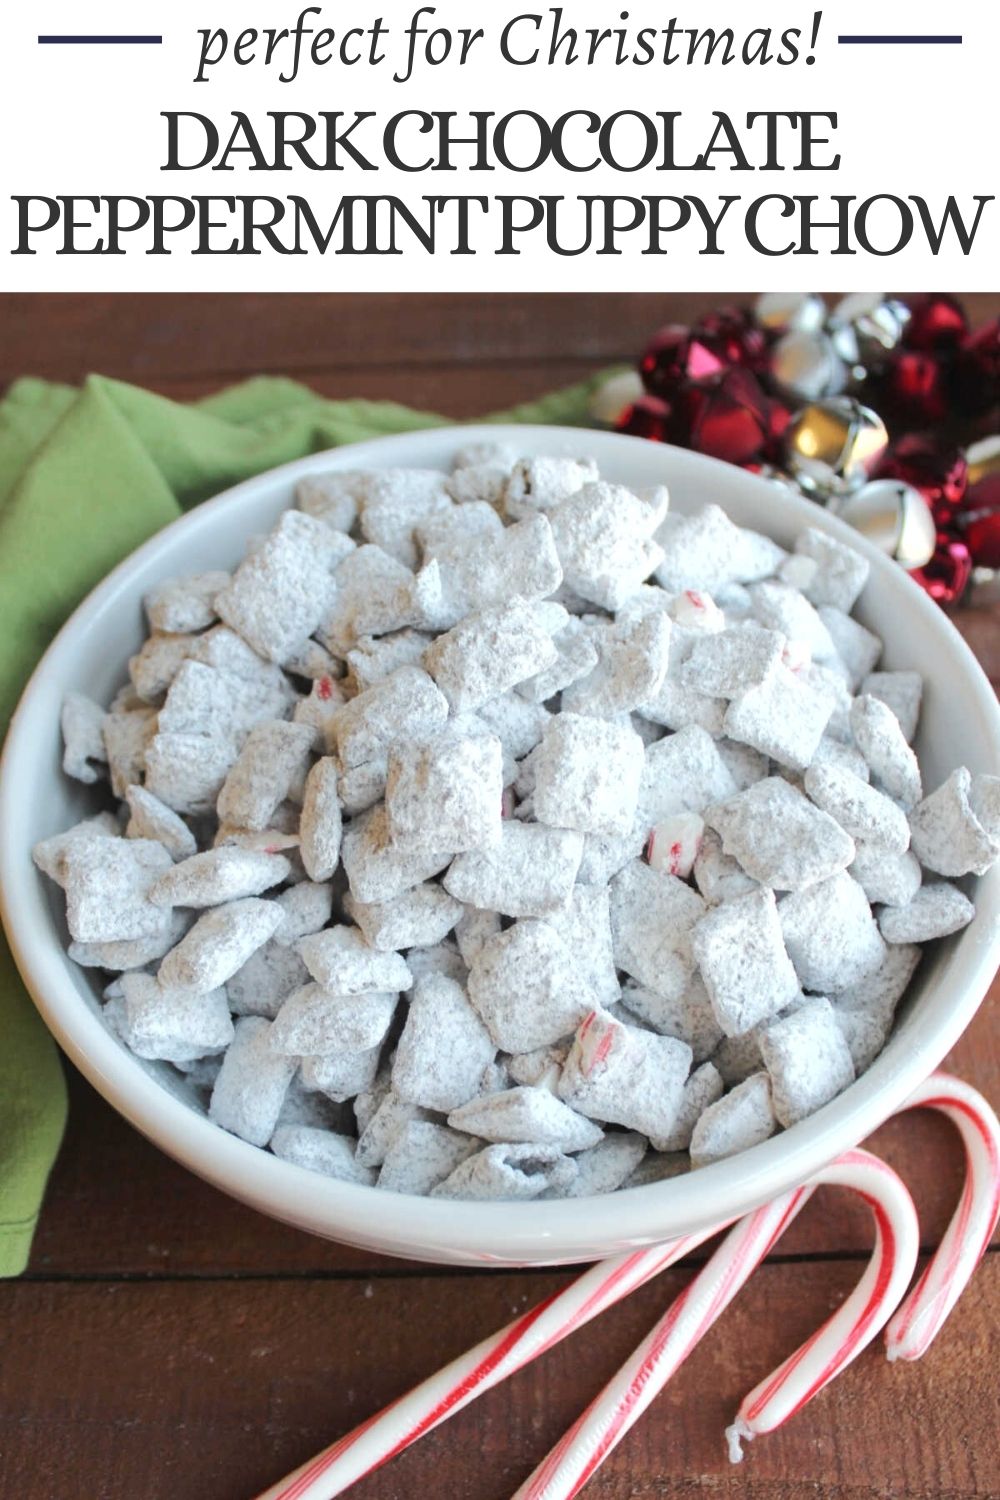 This crunchy and sweet dark chocolate peppermint puppy chow mix is perfect for the Christmas. It only takes a few minutes to make and has the perfect mix of candy canes and chocolate. 